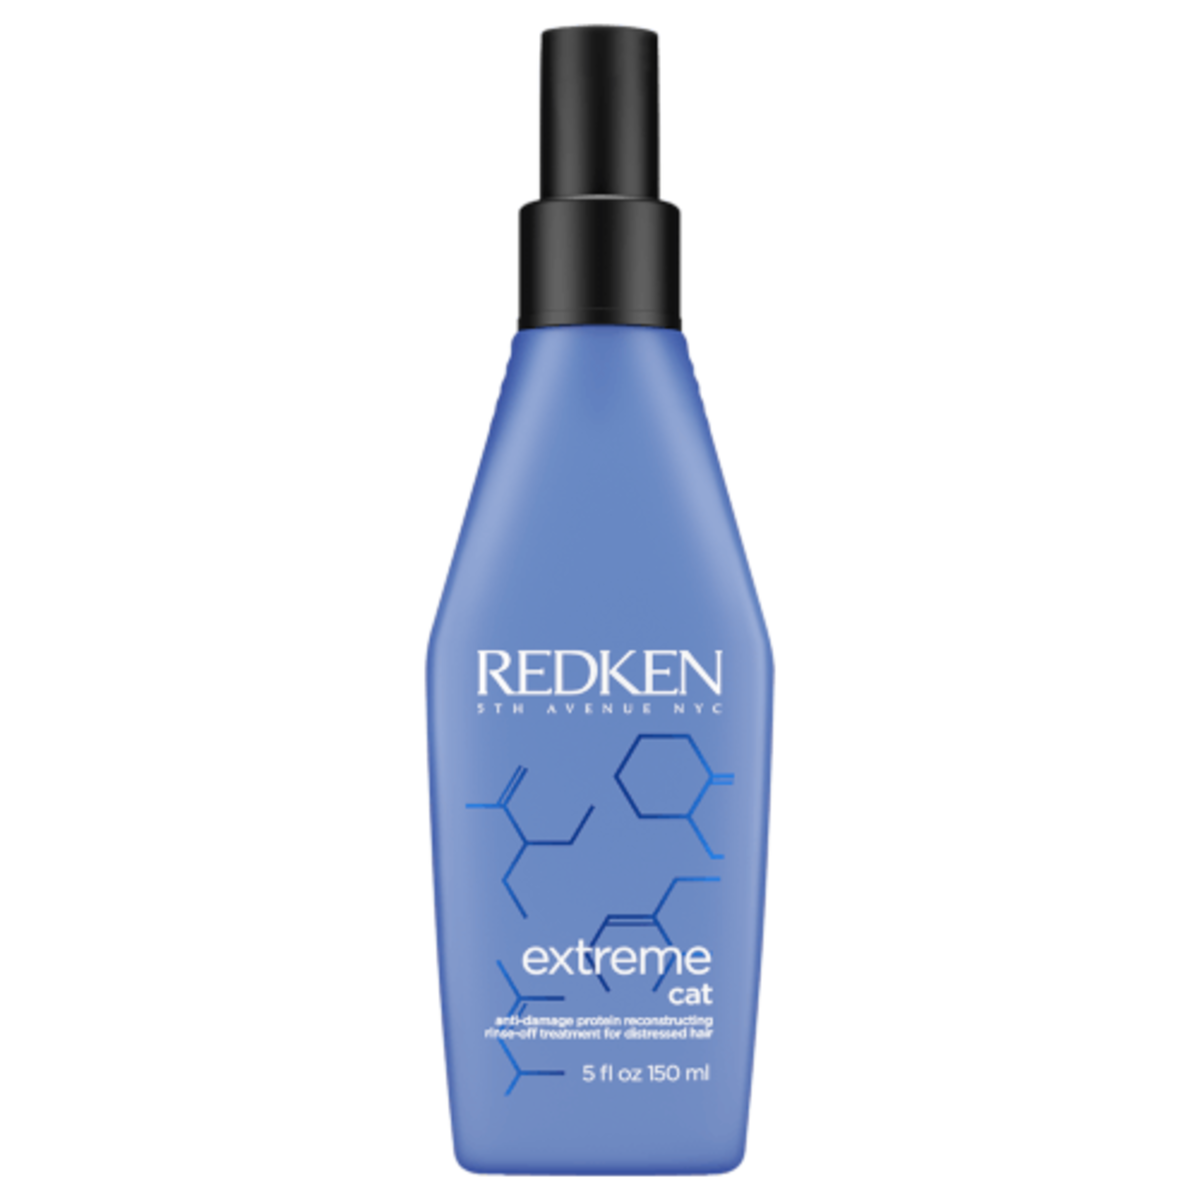 Protein treatments like Redken Extreme CAT actively repair damage to hair, leaving it stronger and healthier with each use.